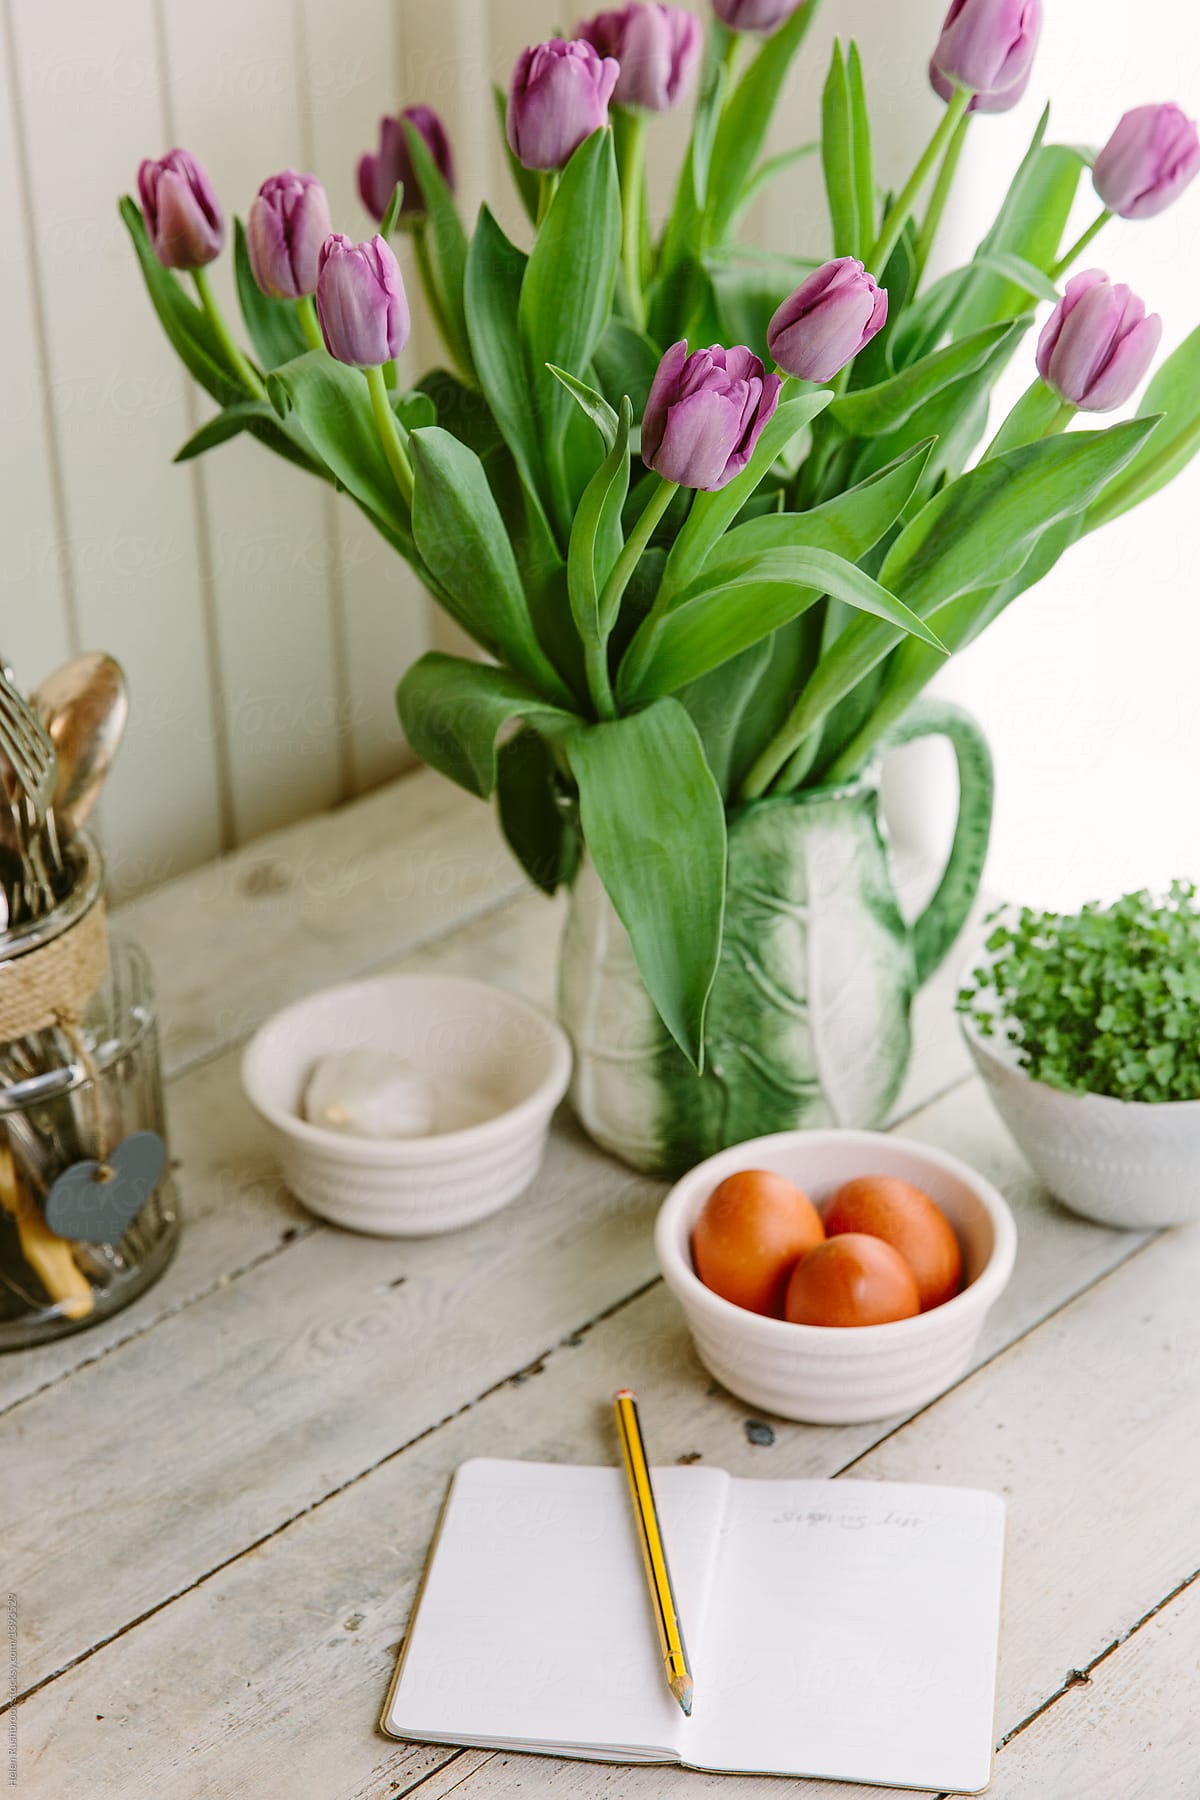 Kitchen counter, with black shopping list, spring flowers and kitchen essentials.